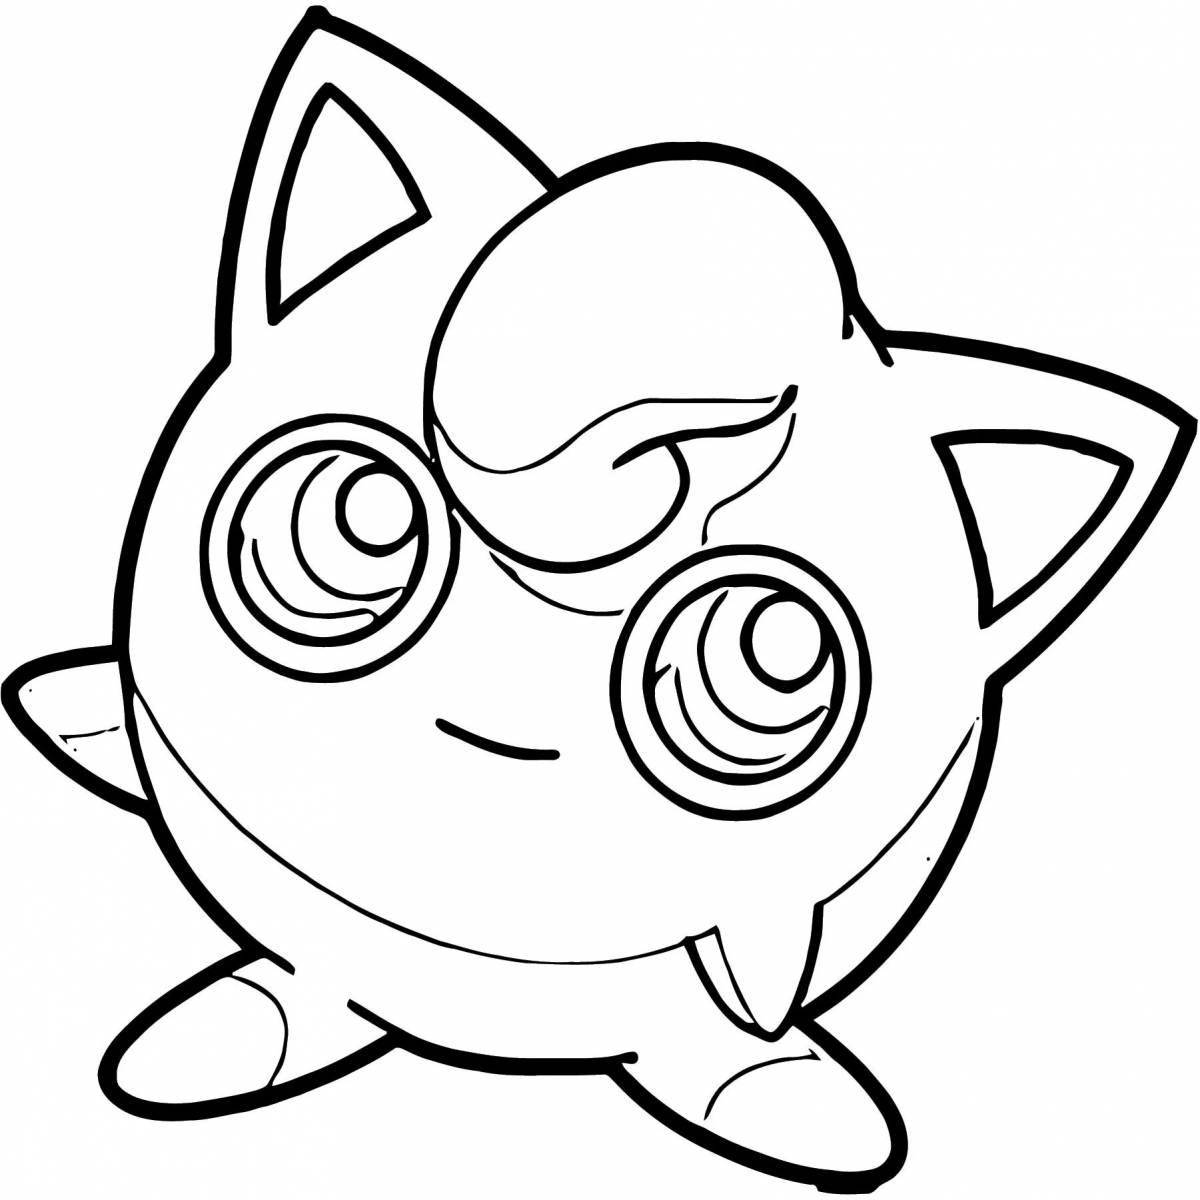 Dazzling Jigglypuff coloring page